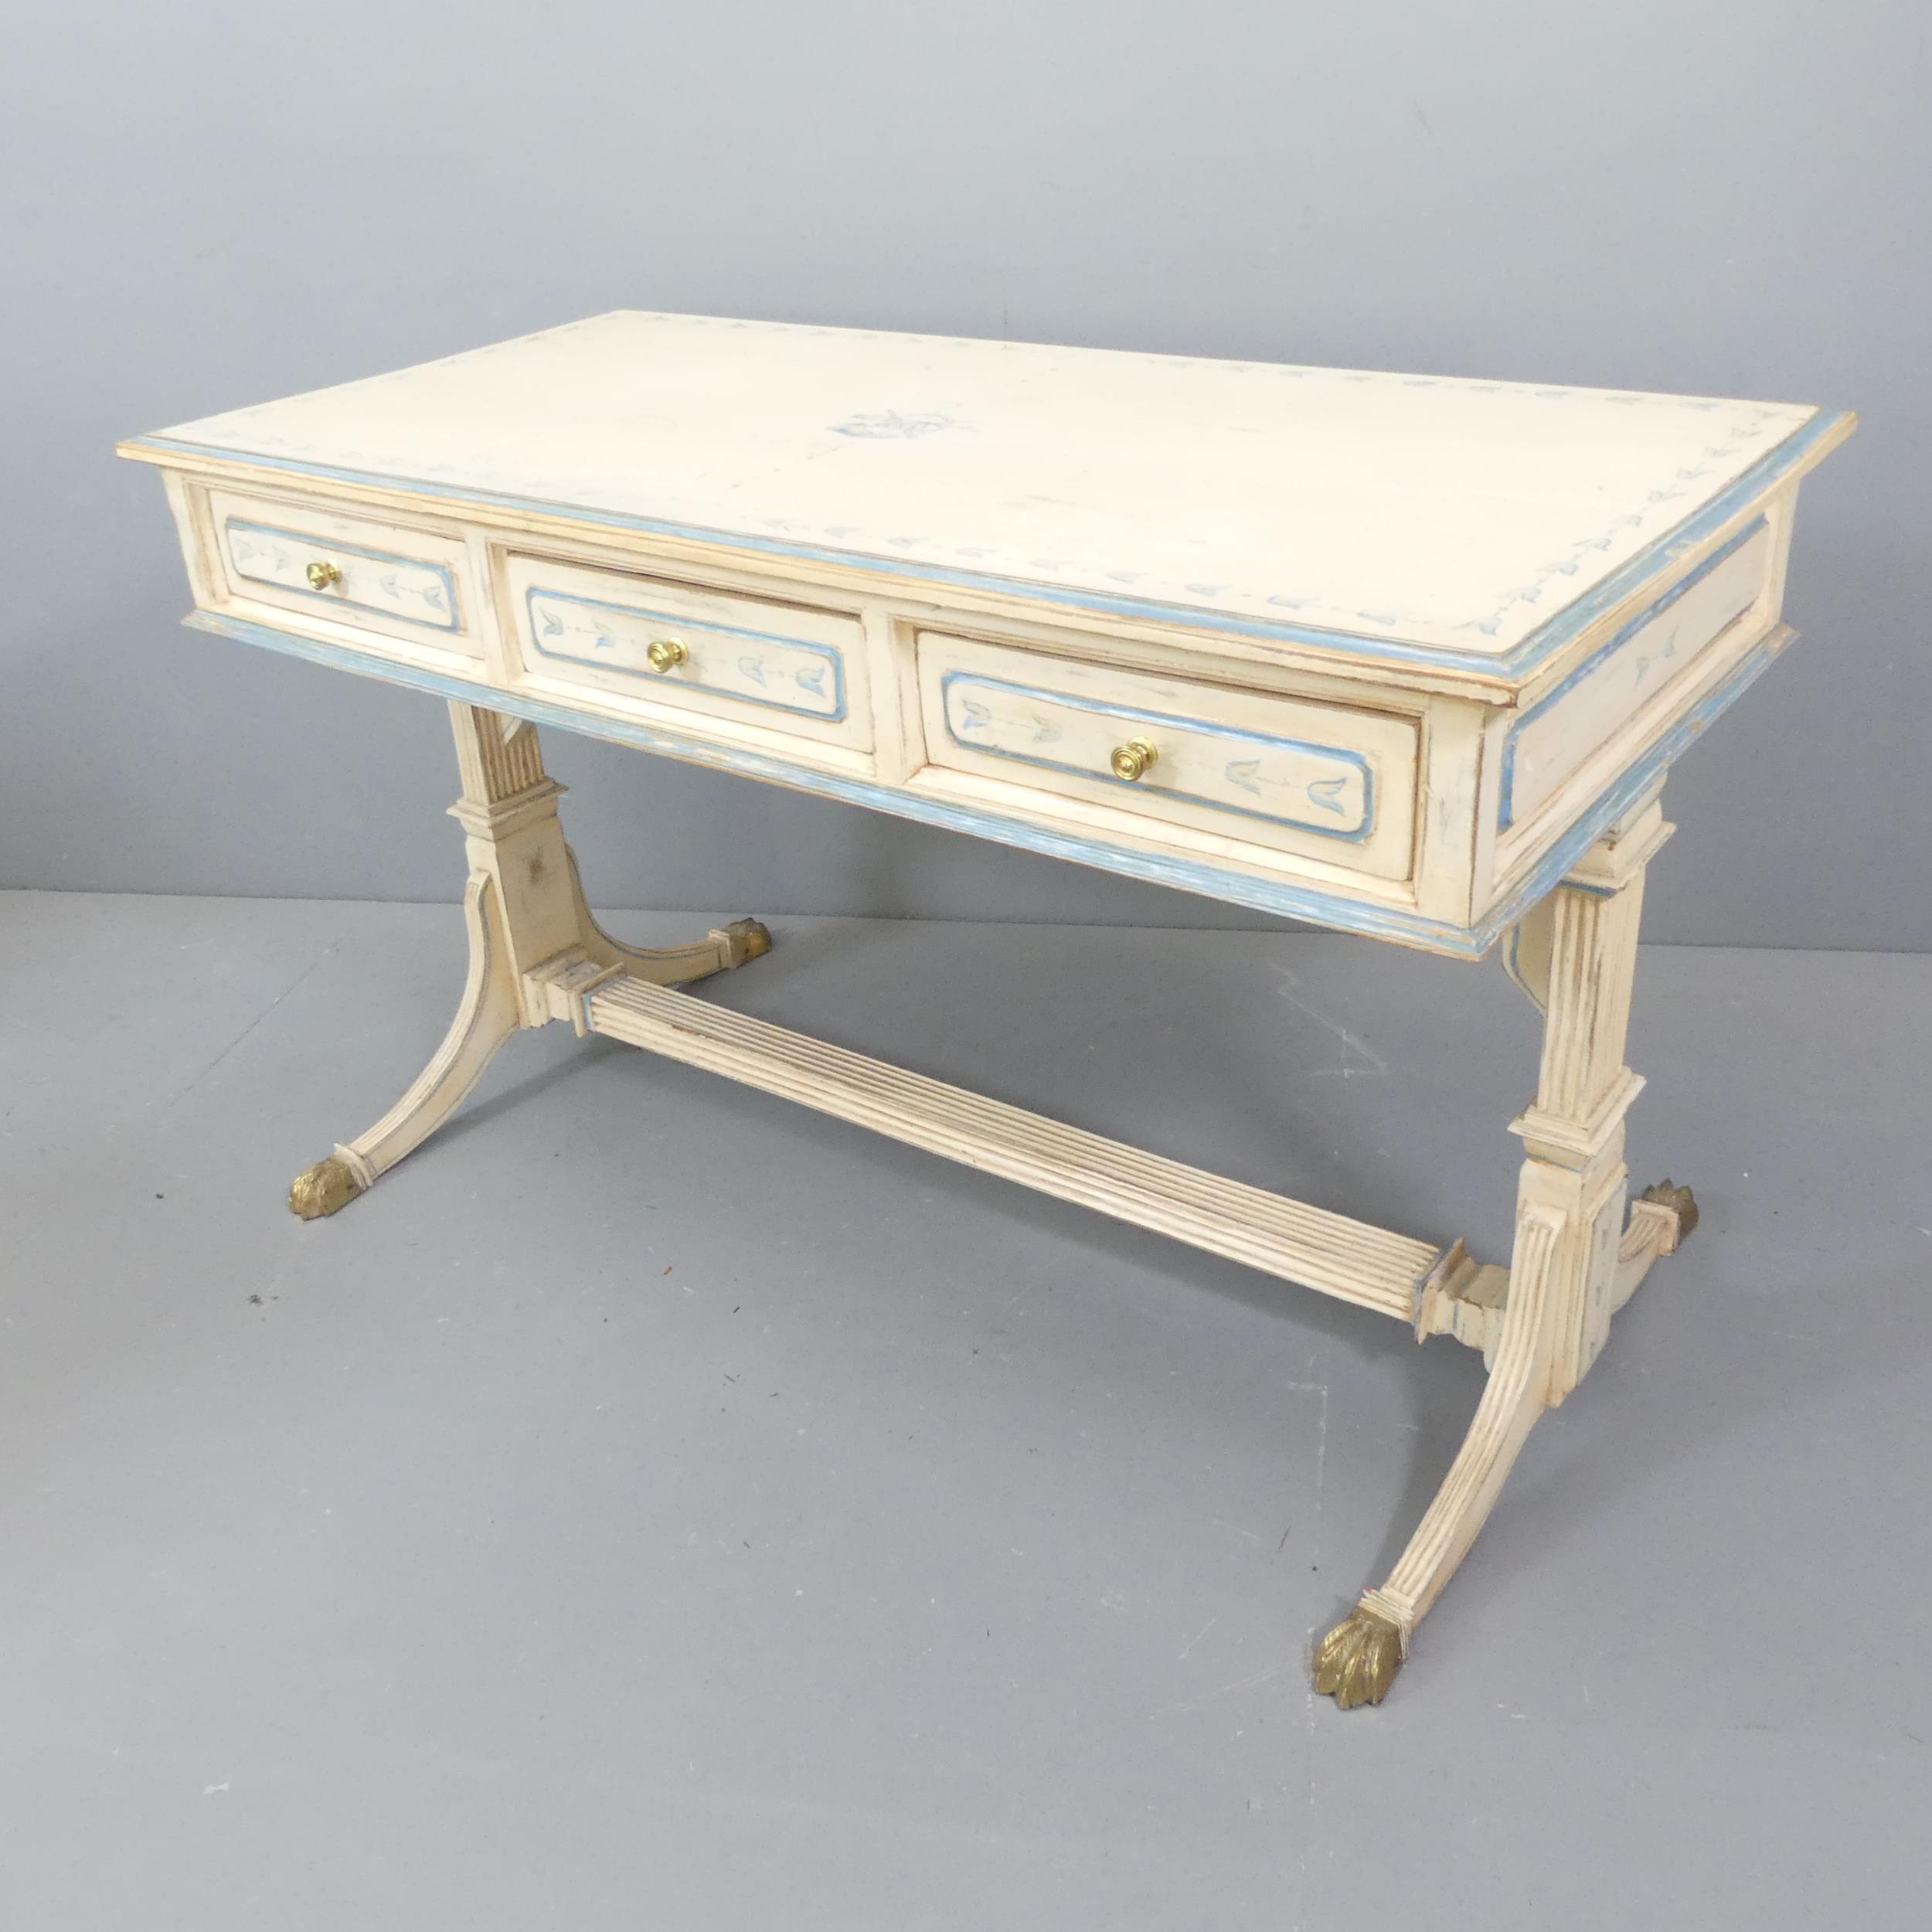 A painted mahogany Regency-style stretcher table, with three drawers and carved decoration.